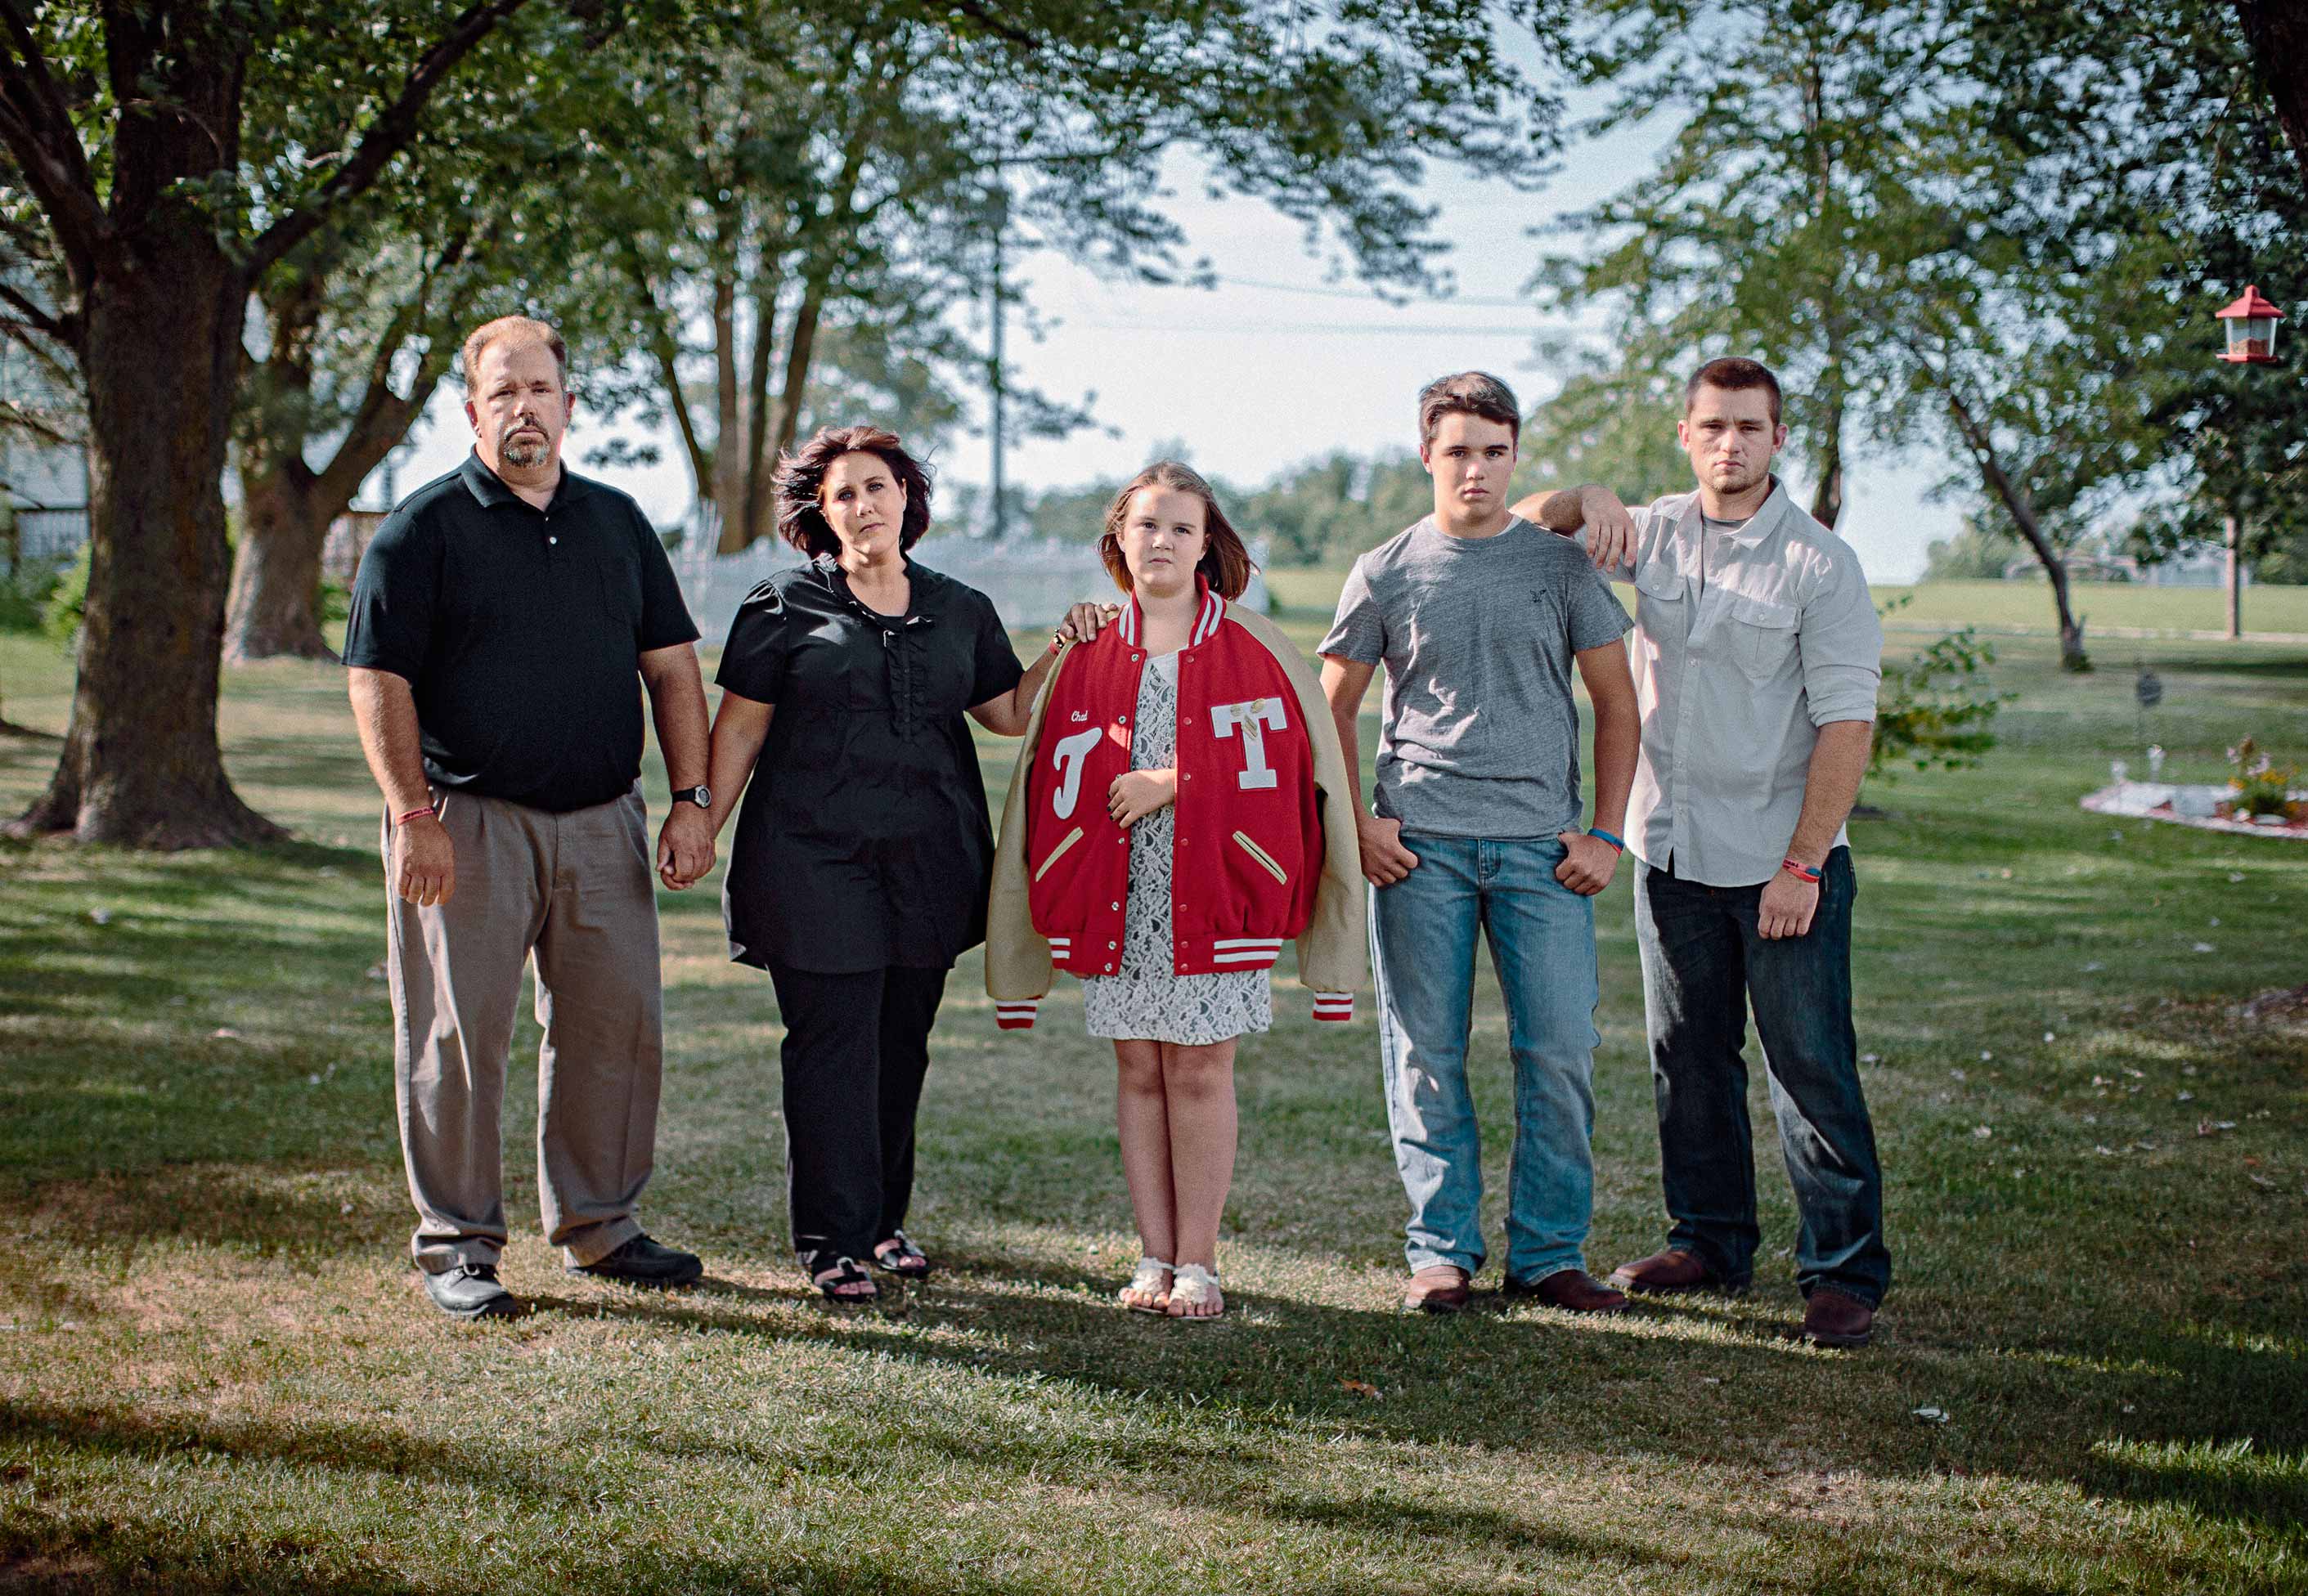 From left: Chad’s father Ken, mother Amy and siblings Mandy, Kenton and Zane in the family’s yard in central Missouri. Kenton, a high school freshman, has given up football (Bryan Schutmaat for TIME)